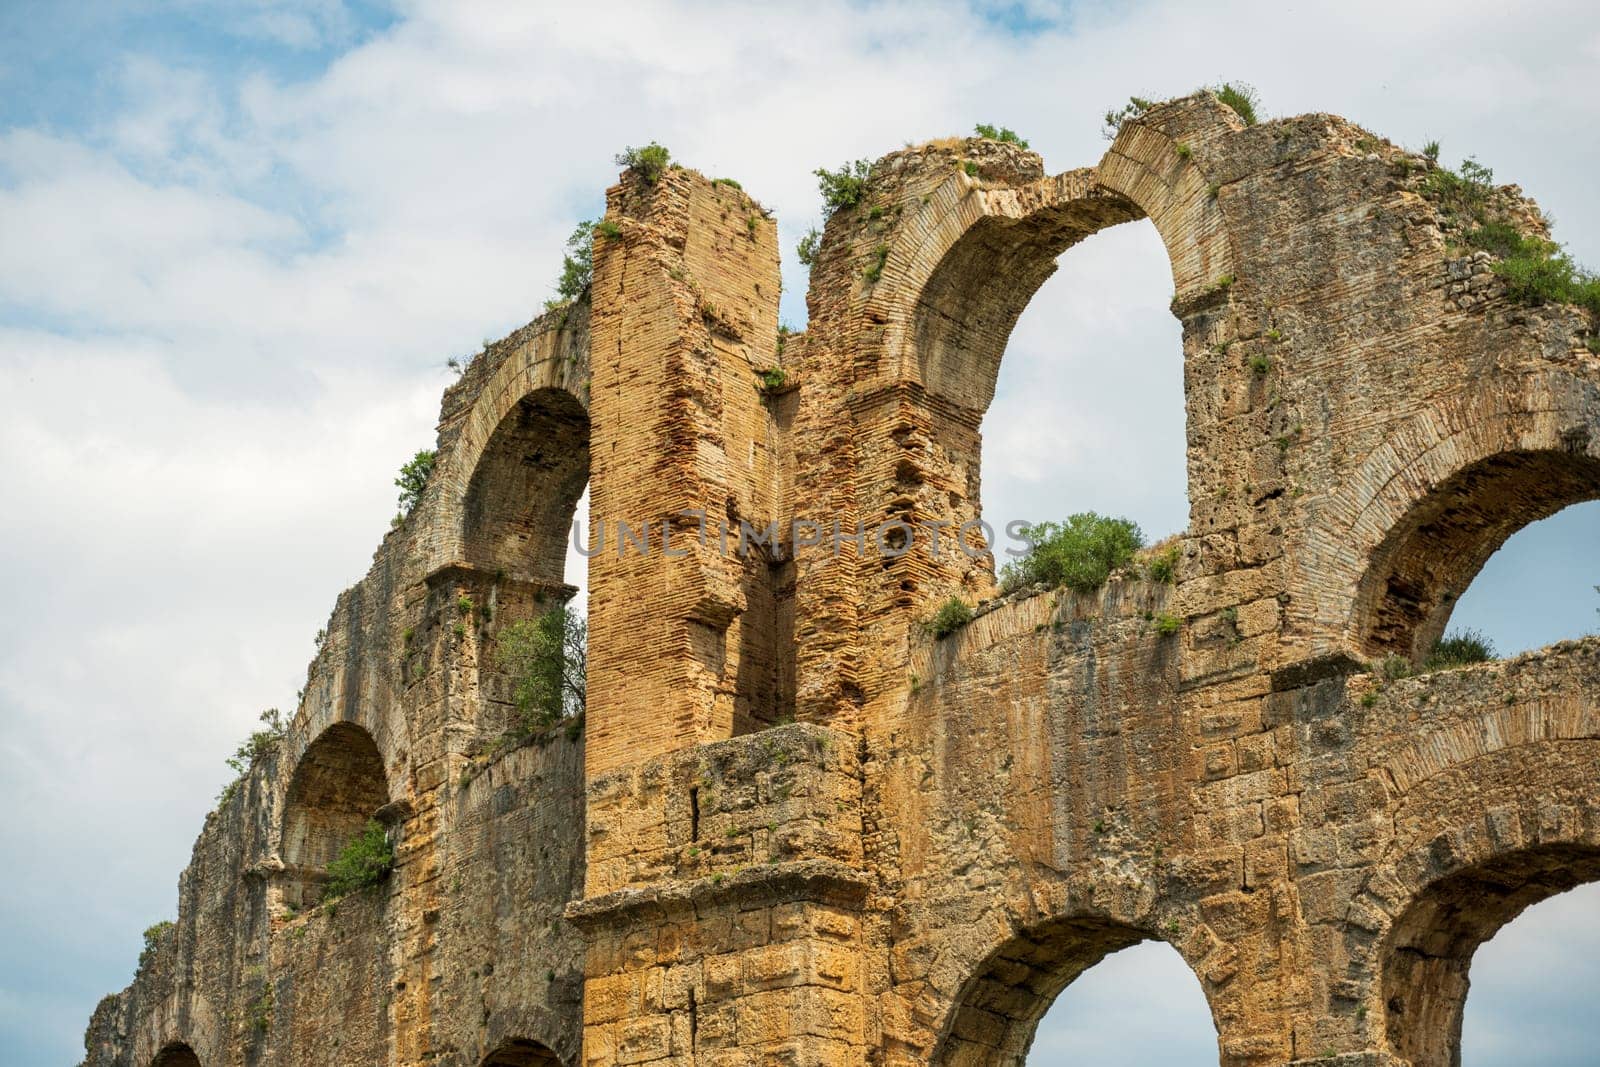 Aqueducts in the ancient city of Aspendos in Antalya, Turkey by Sonat